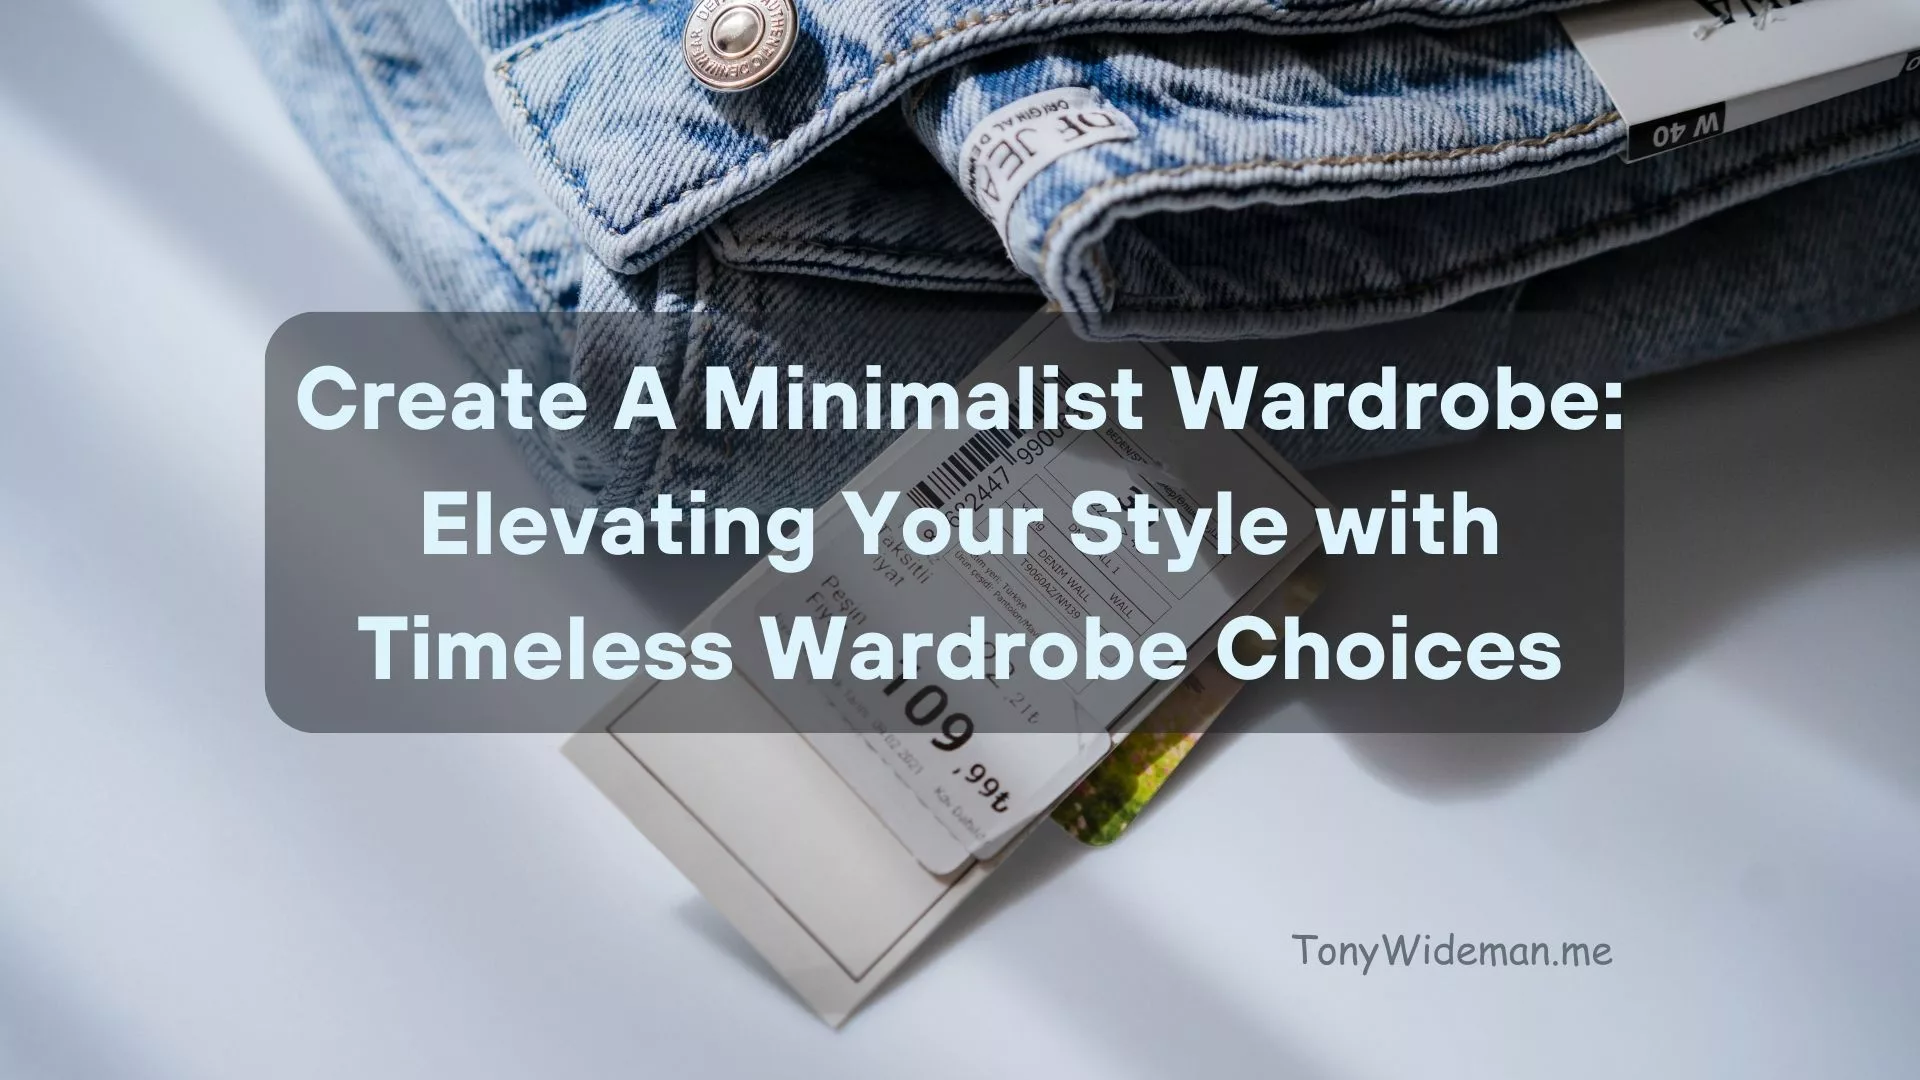 Create A Minimalist Wardrobe: Elevating Your Style with Timeless Wardrobe Choices